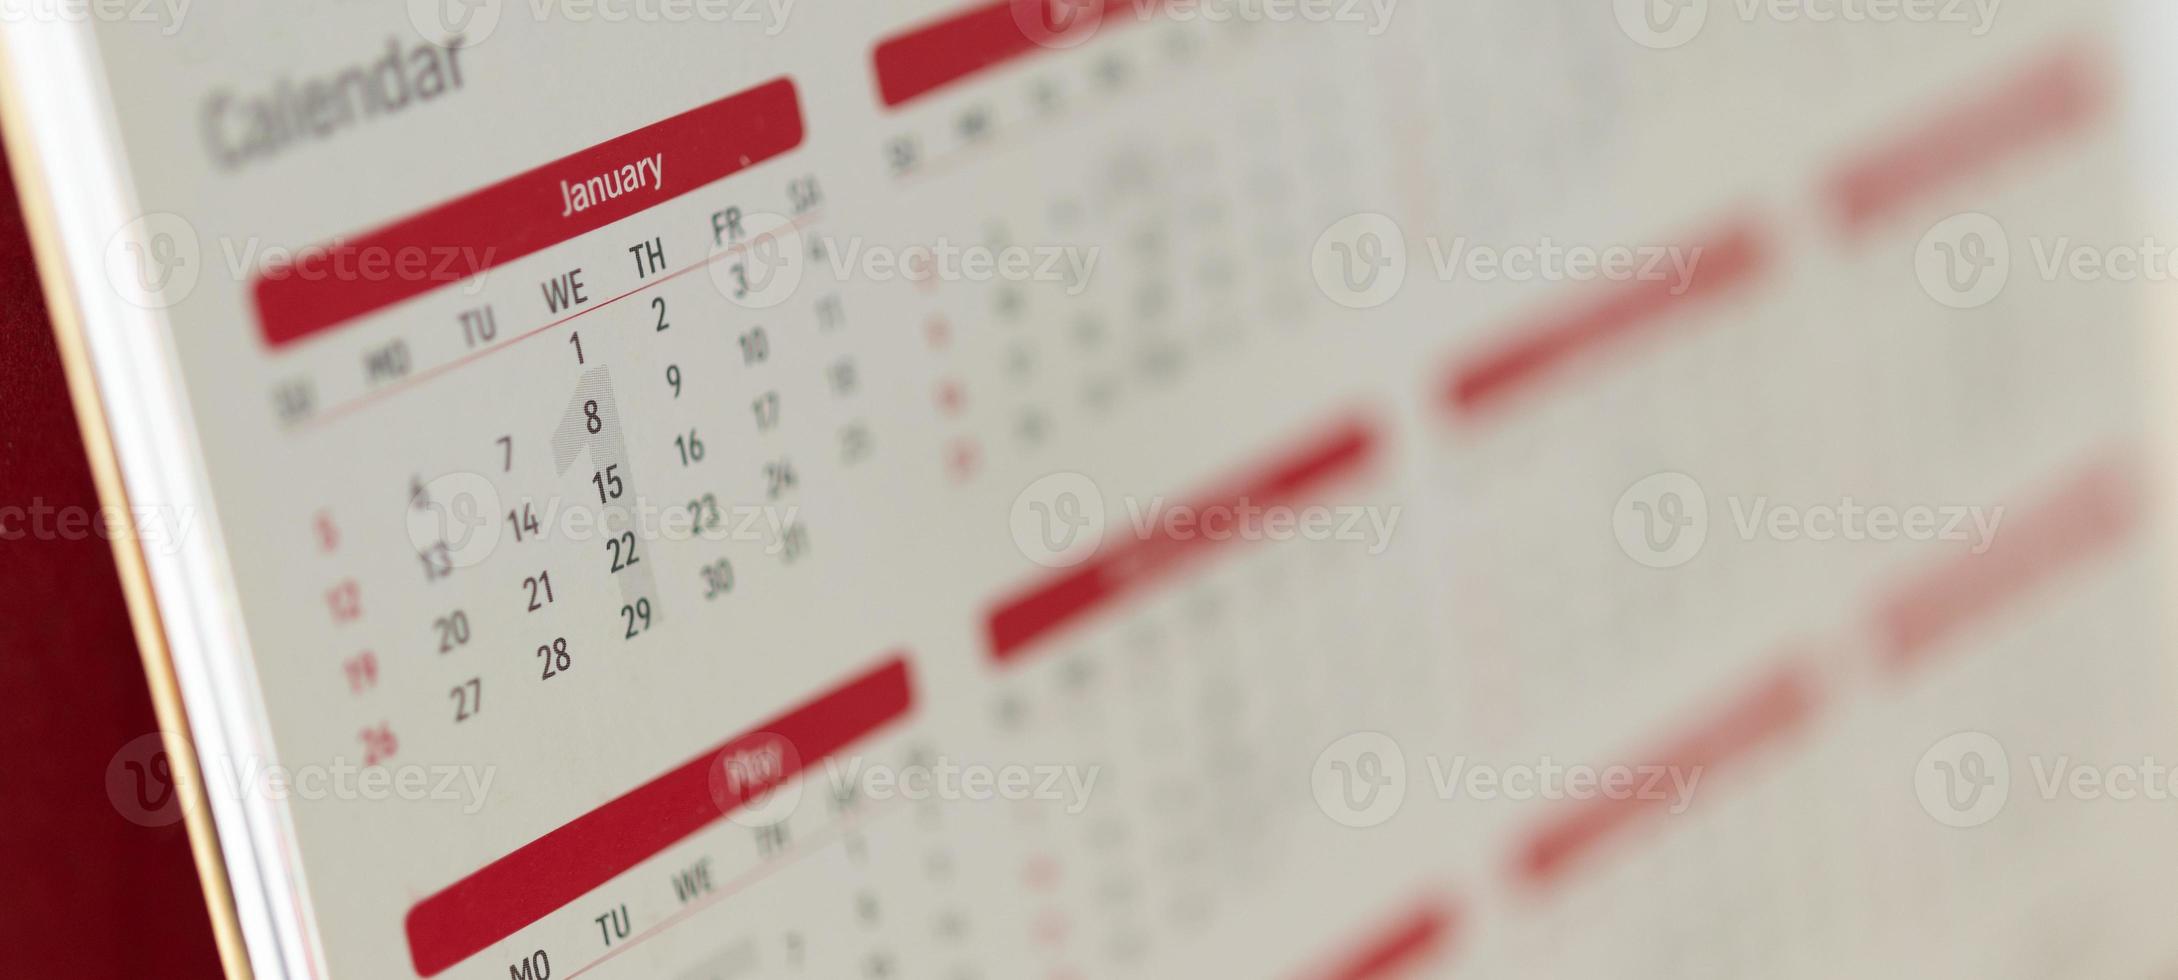 Calendar page close up background business planning appointment meeting concept photo